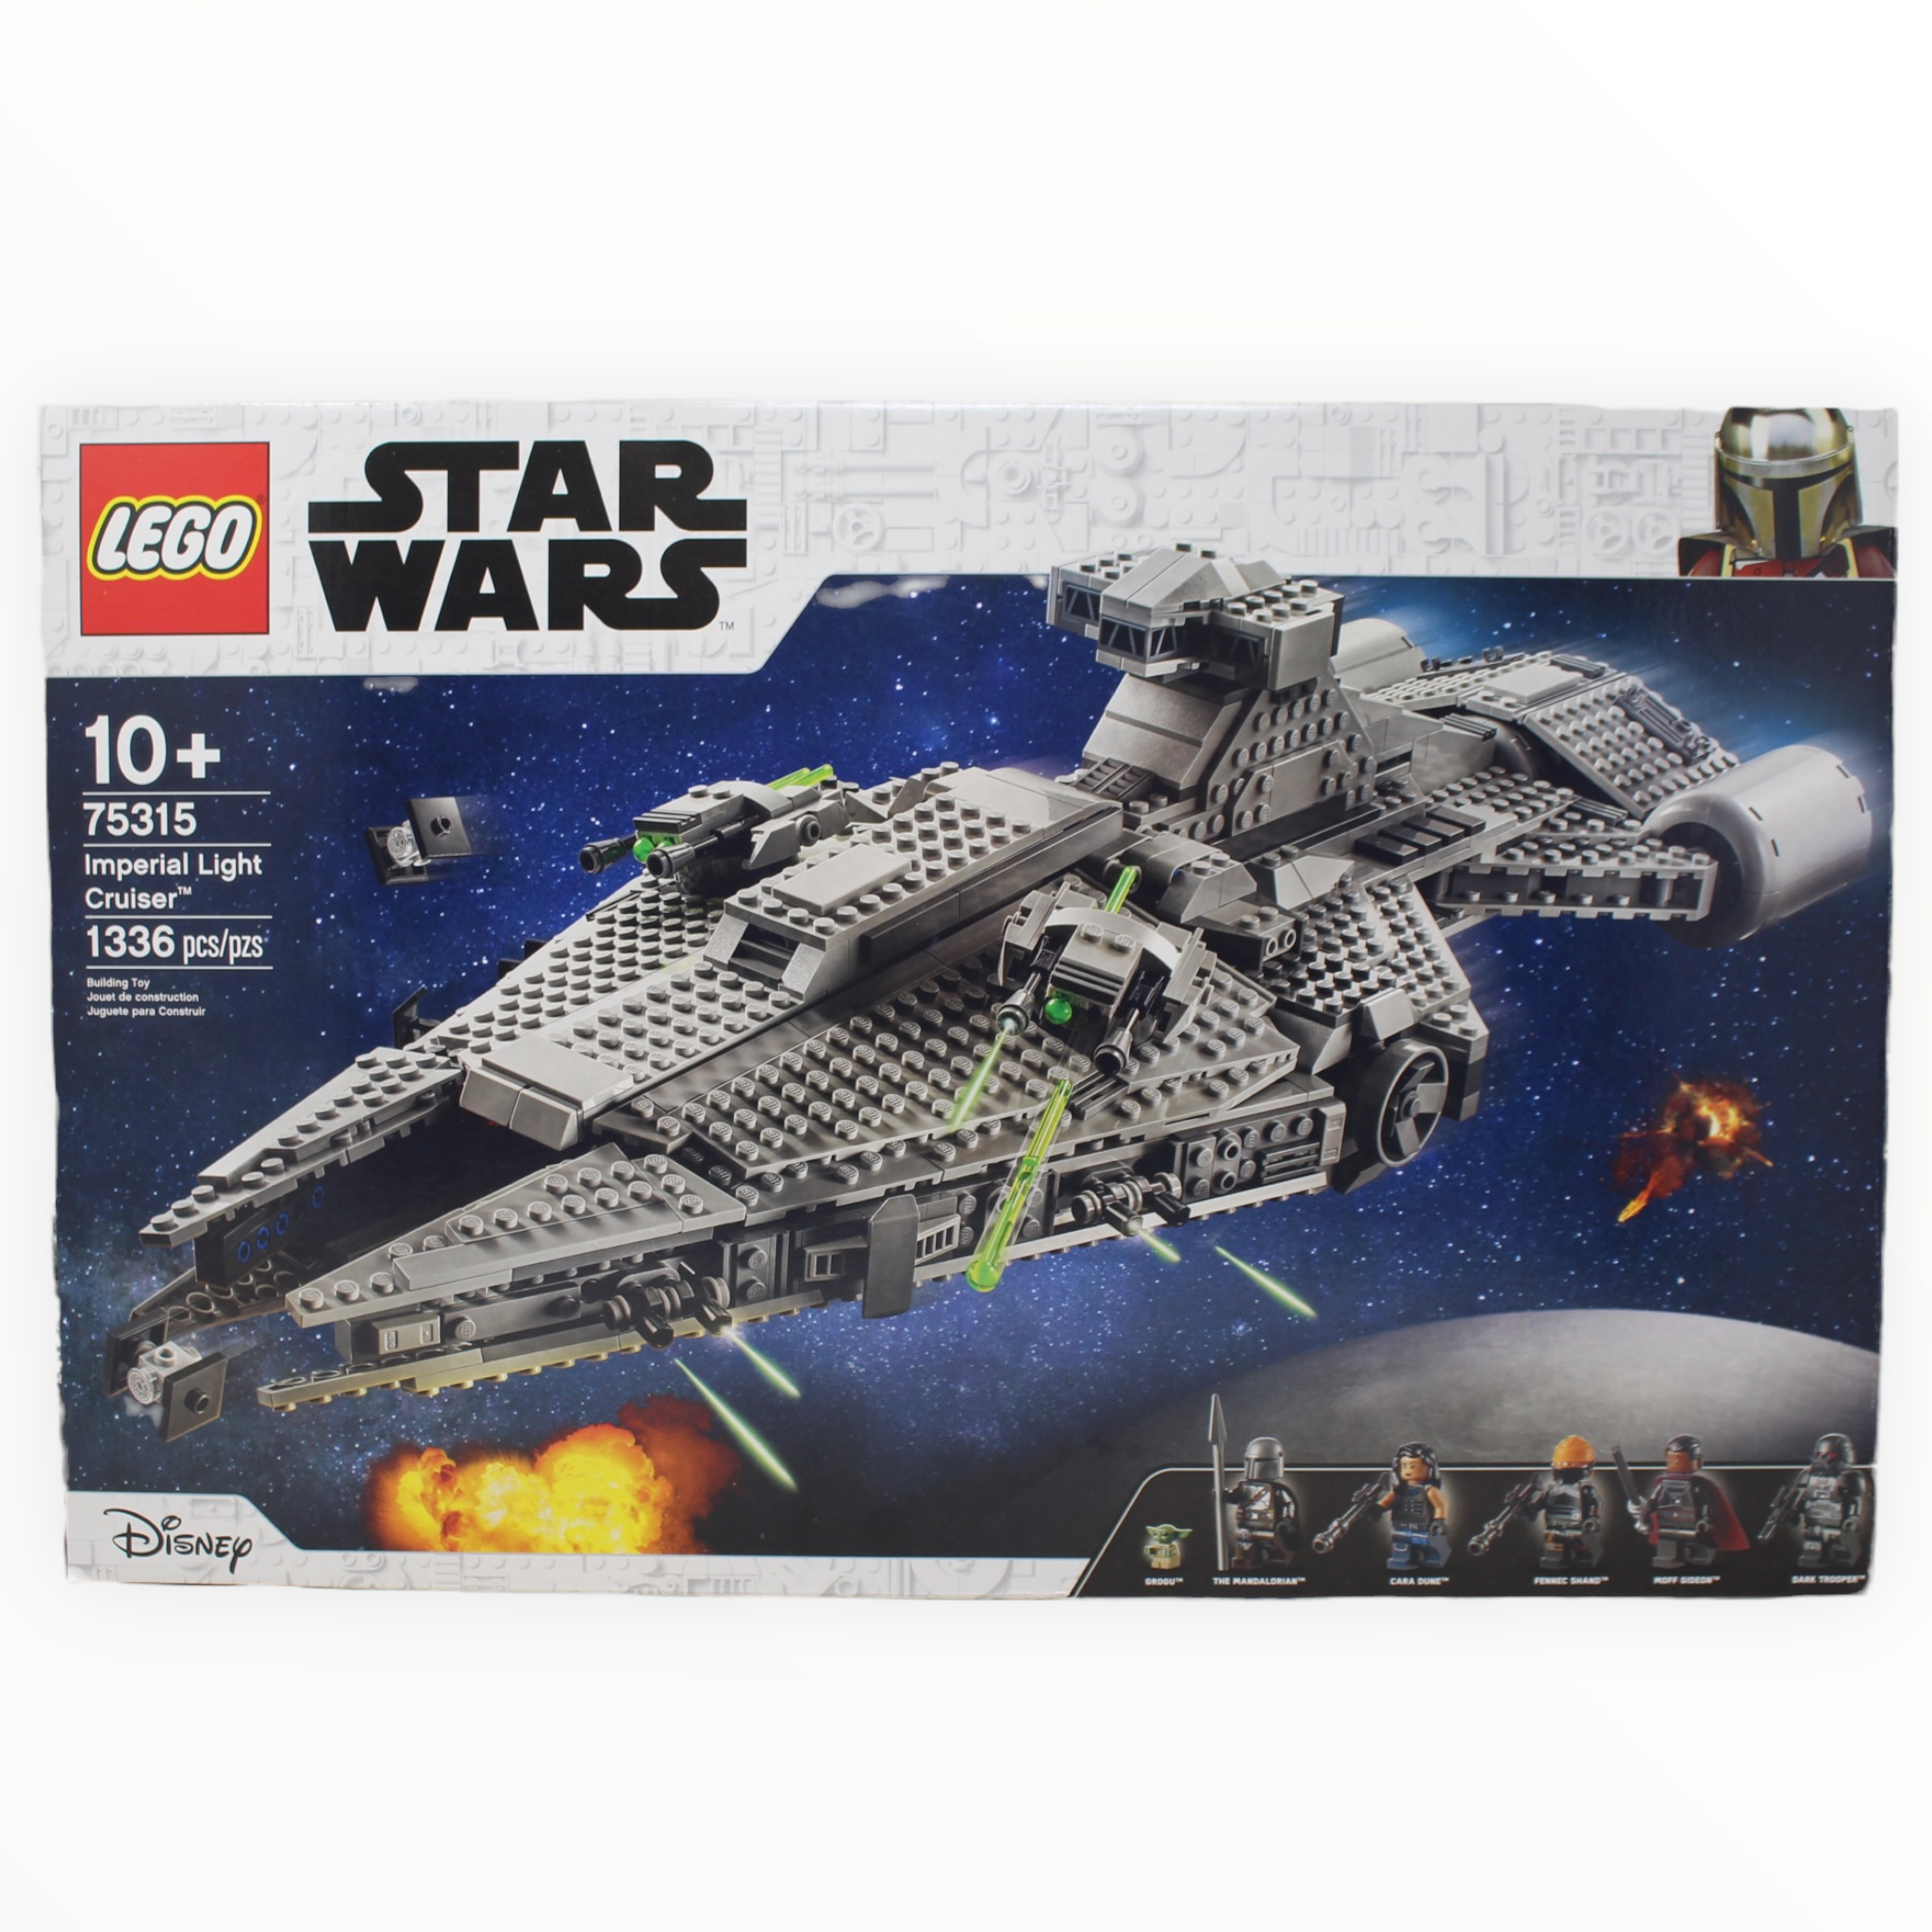 Certified Used Set 75315 Star Wars Imperial Light Cruiser